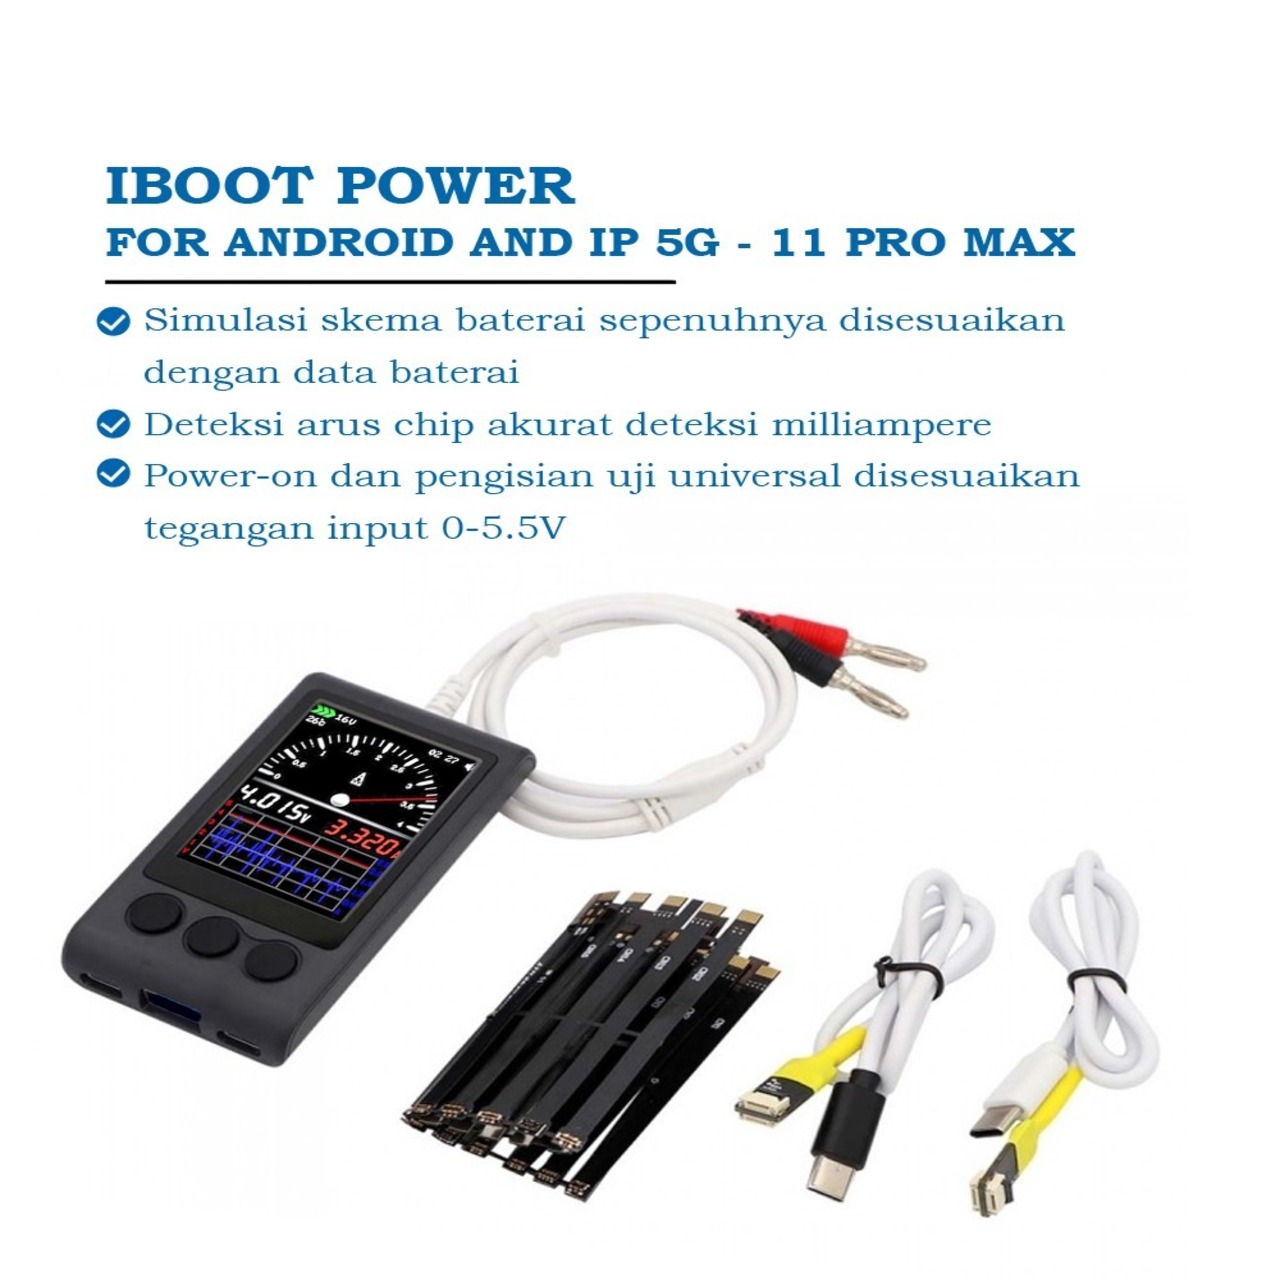 IBOOT-POWER-FOR-ANDROID-AND-IP-5G-11-PRO-MAX